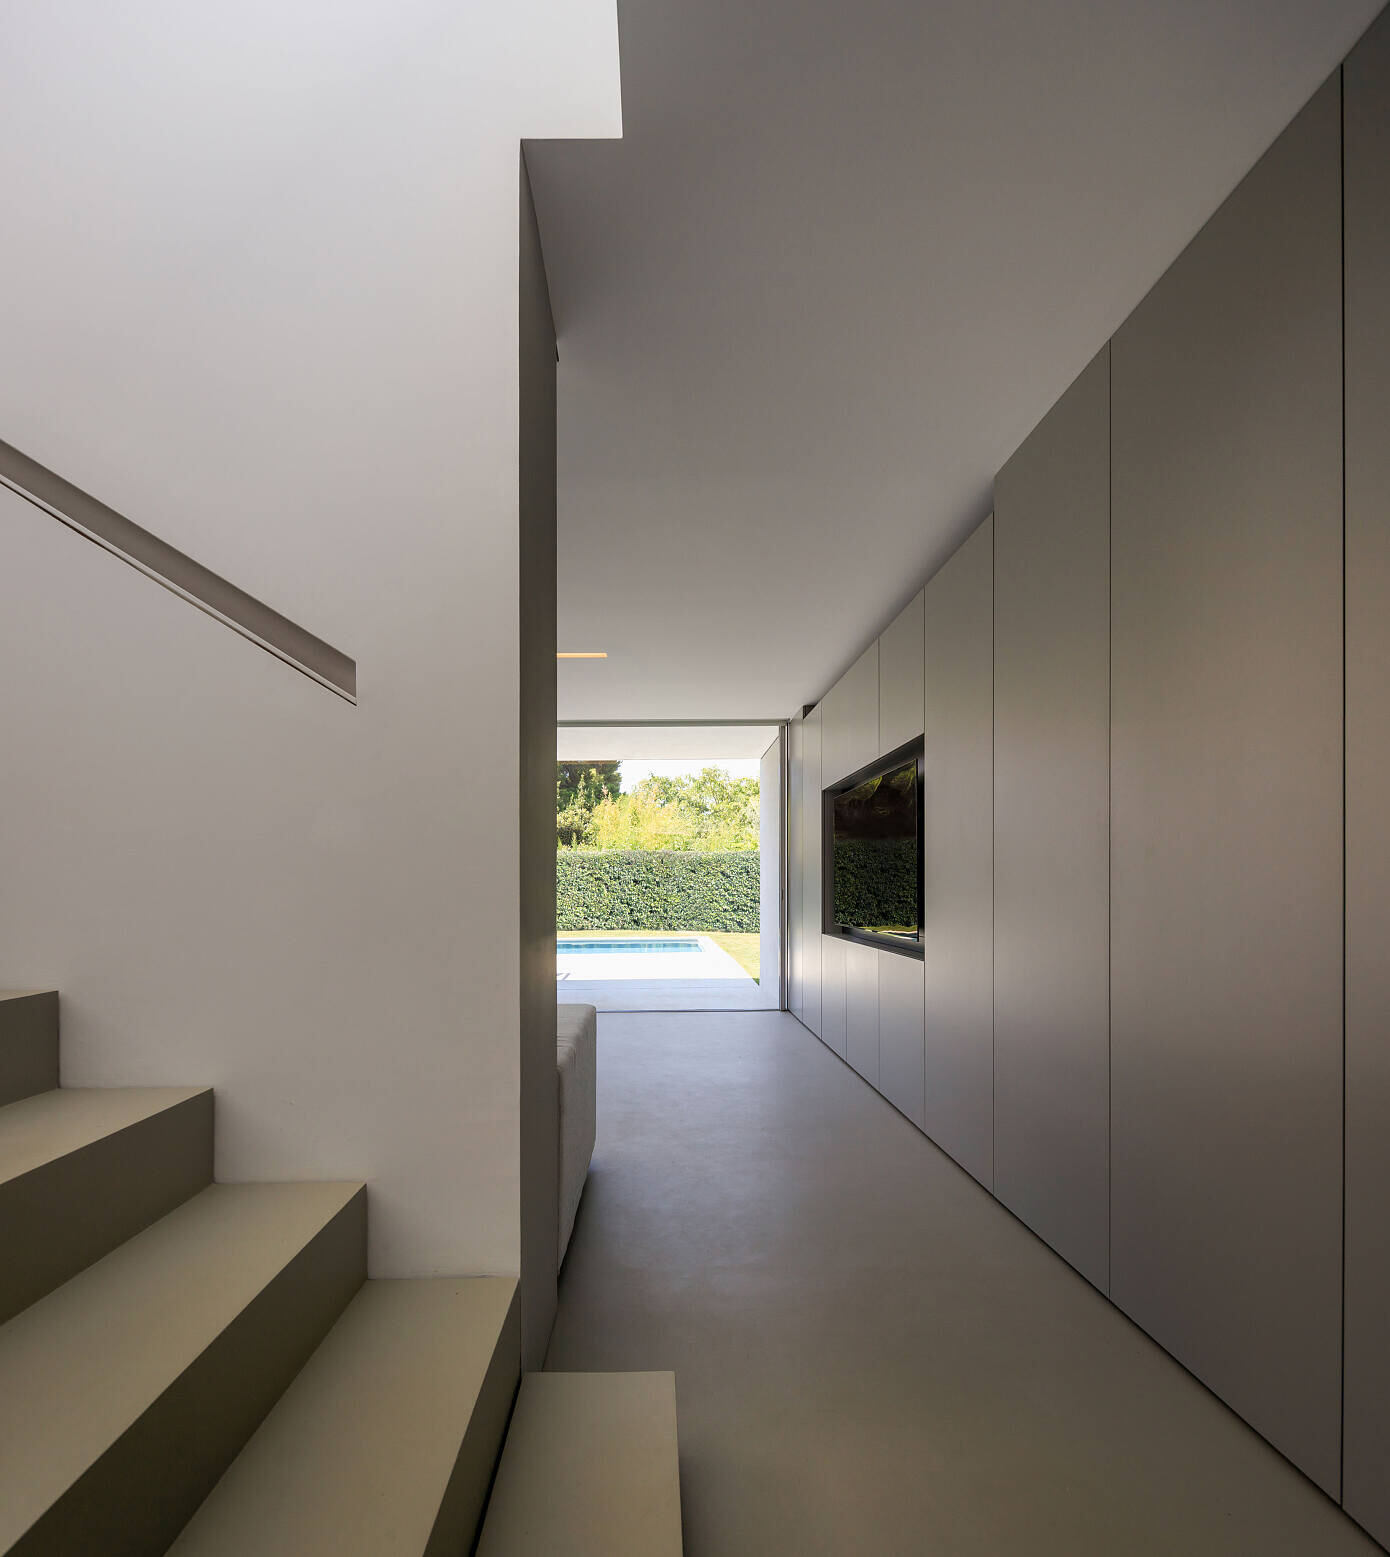 House of Silence by Fran Silvestre Arquitectos